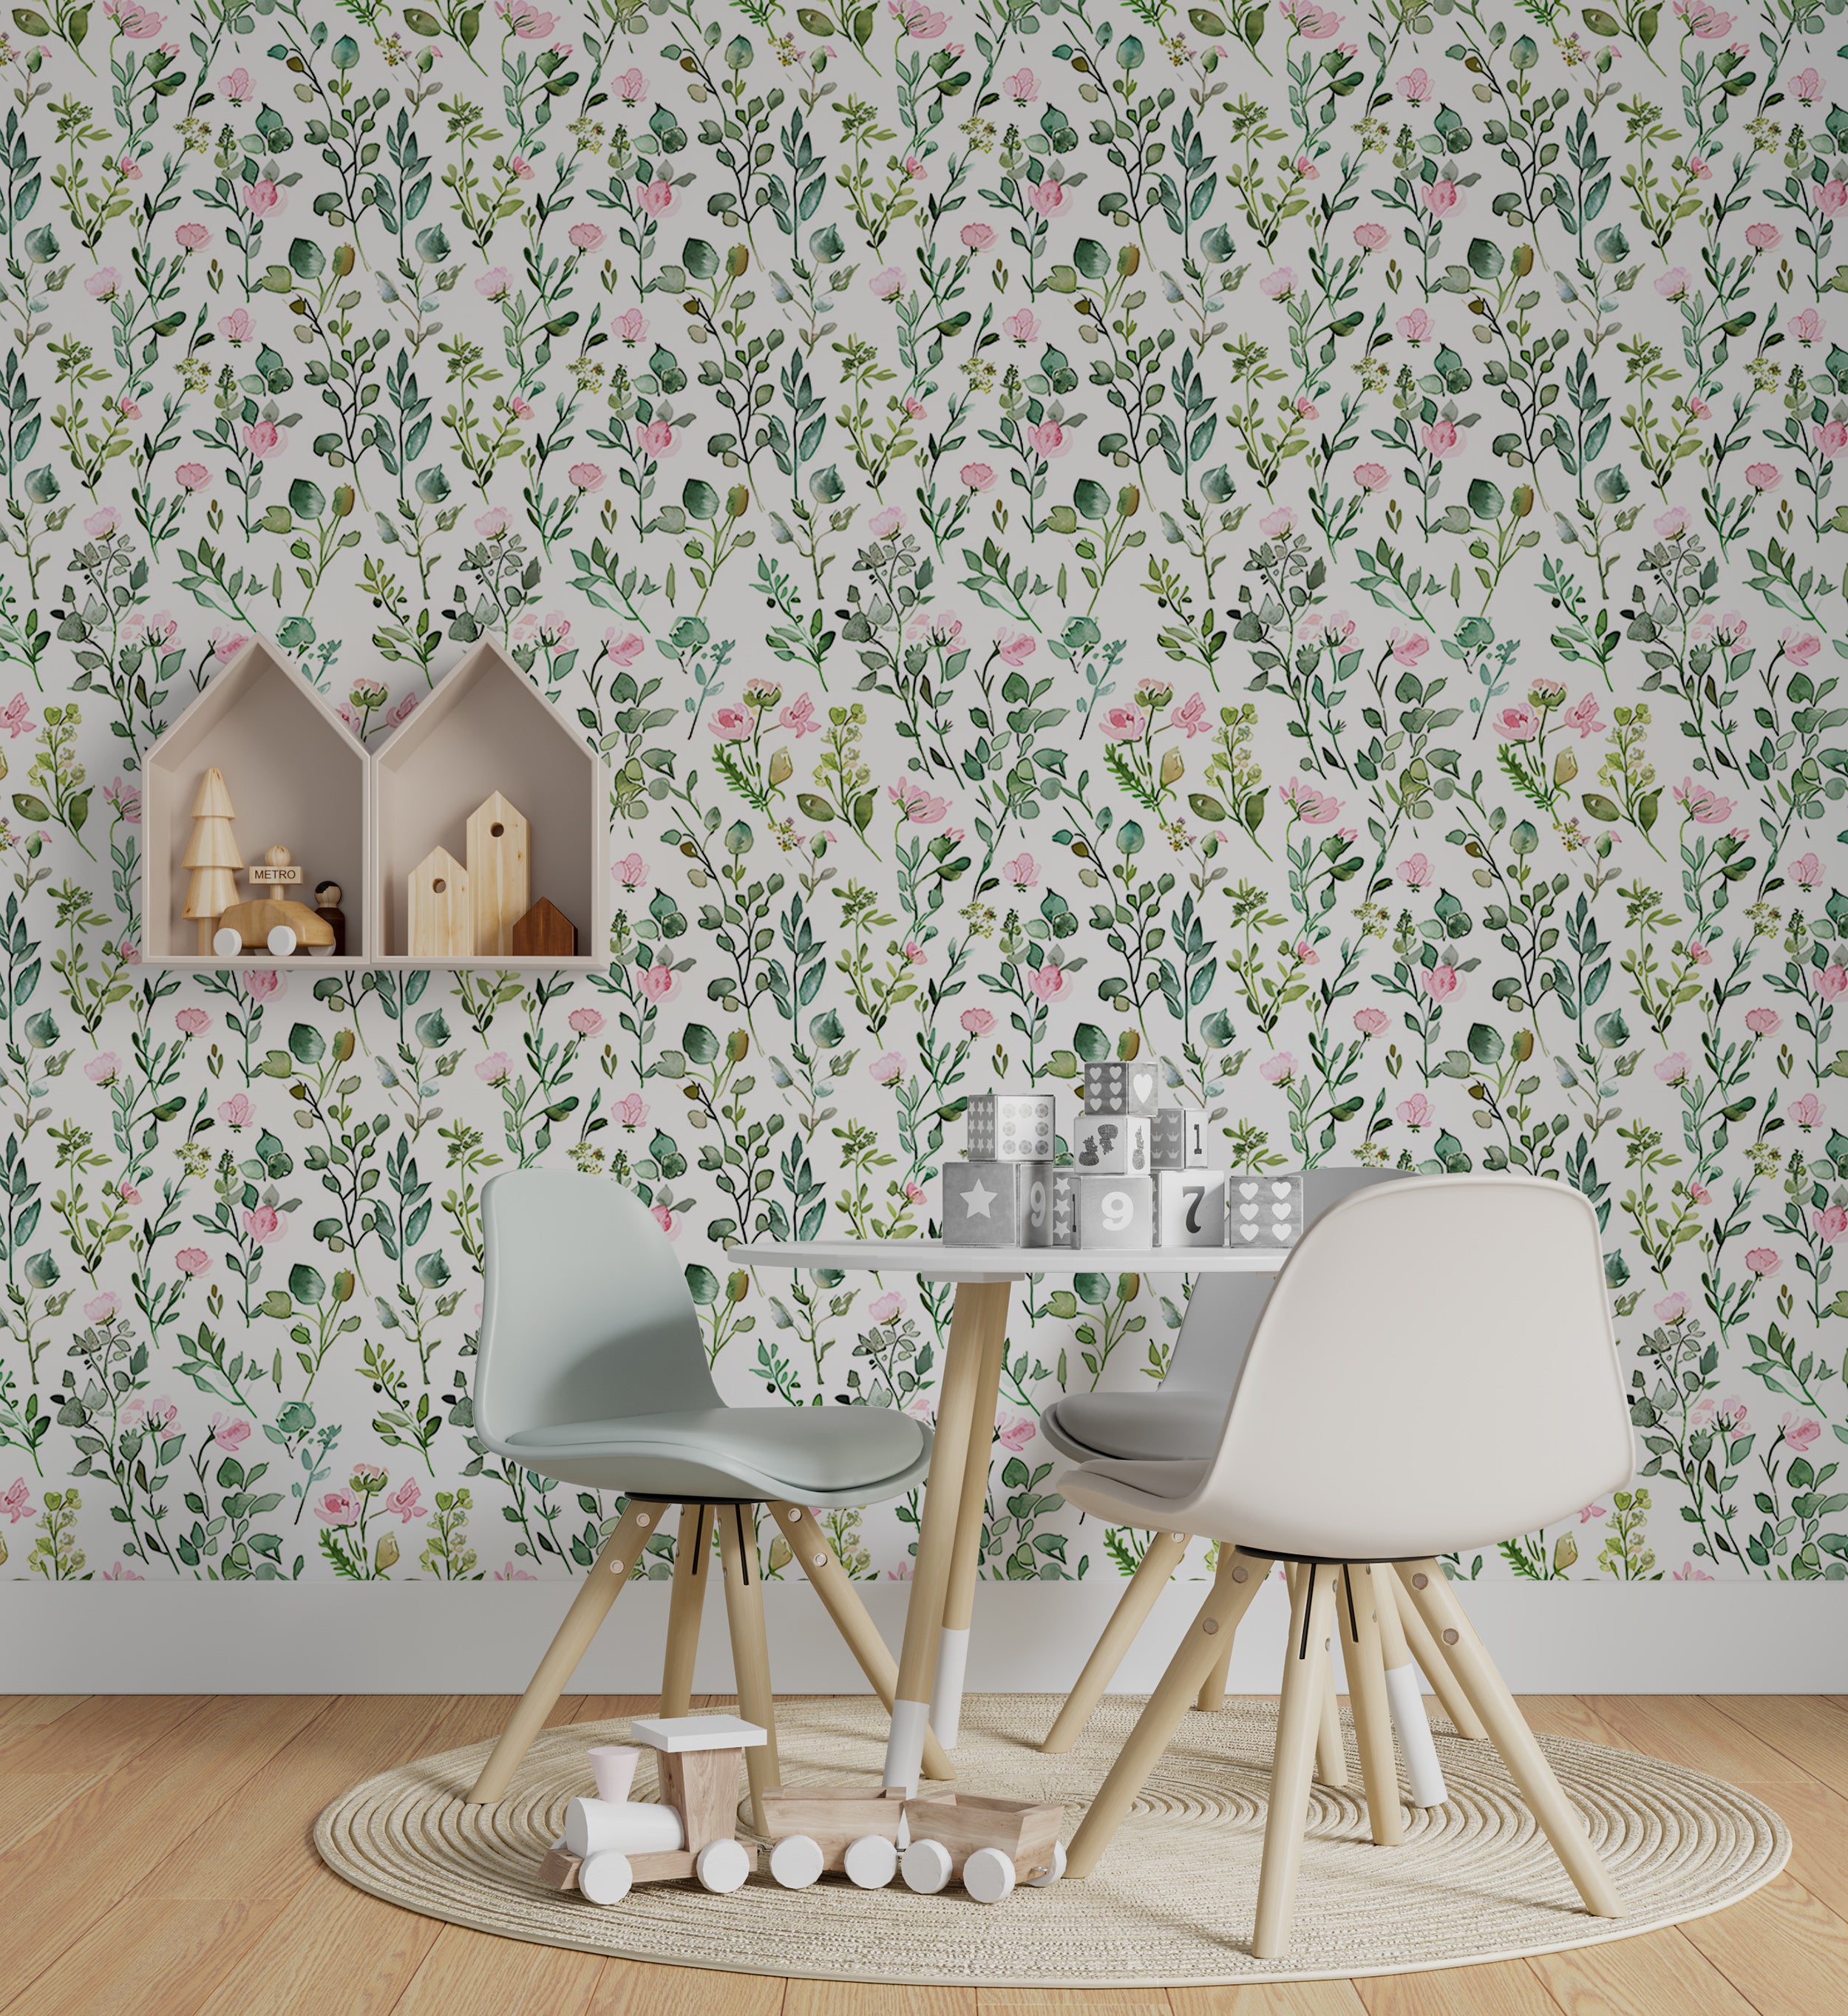 Gentle Meadow Flowers Pattern, Removable Floral Wallpaper Calming Wildflower Wall Mural, Pastel Floral Peel and Stick Design